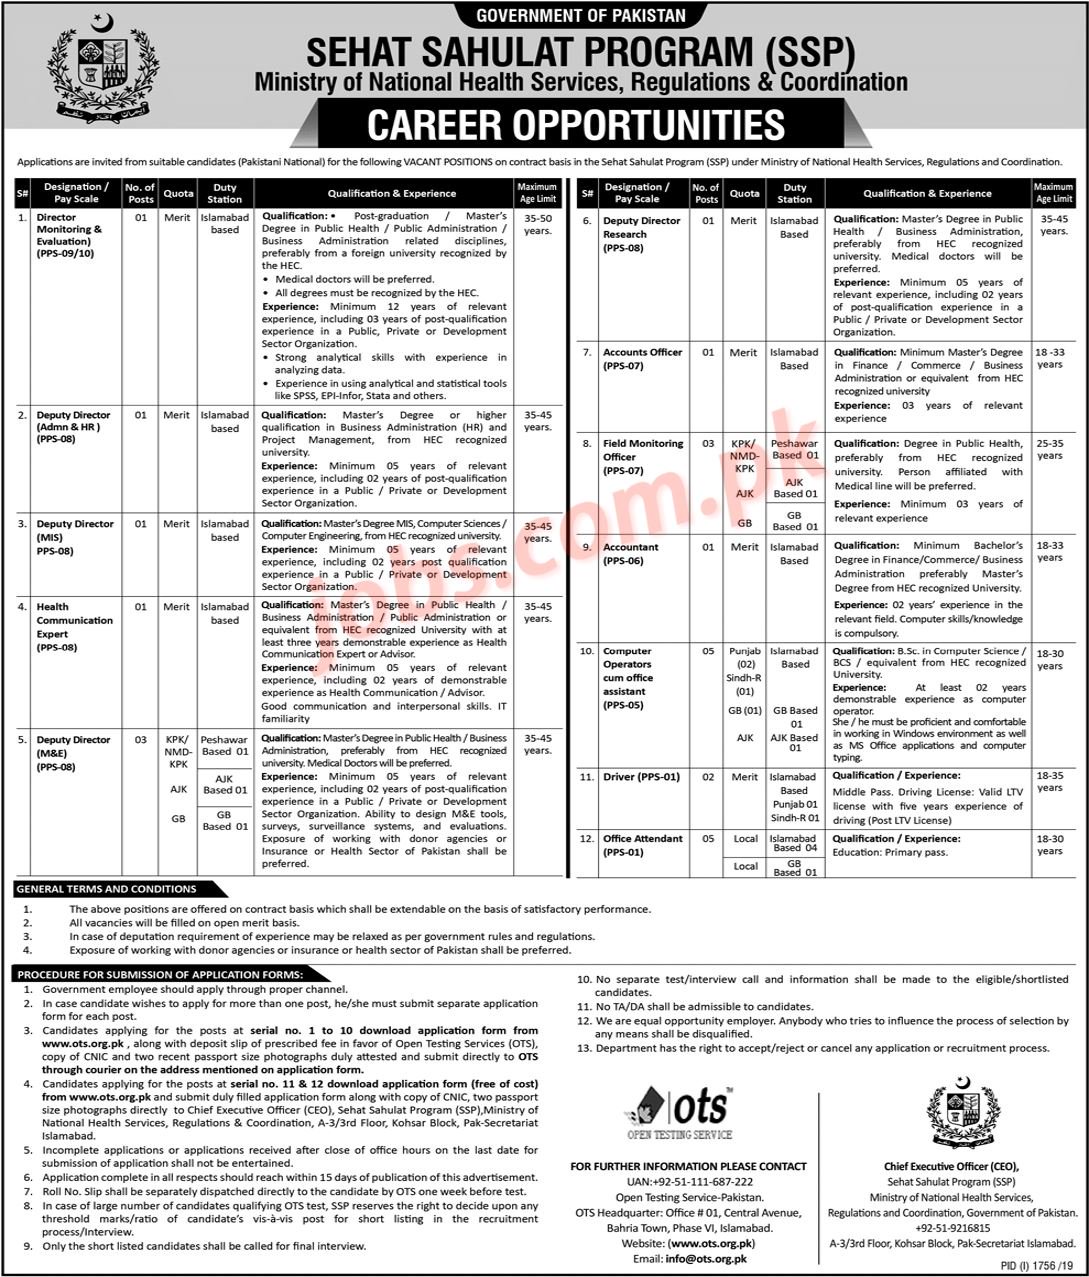 Sehat Sahulat Program Pakistan Jobs 2019 For Monitoring Officers, Accounts, Computer Operators, Deputy Directors And Other